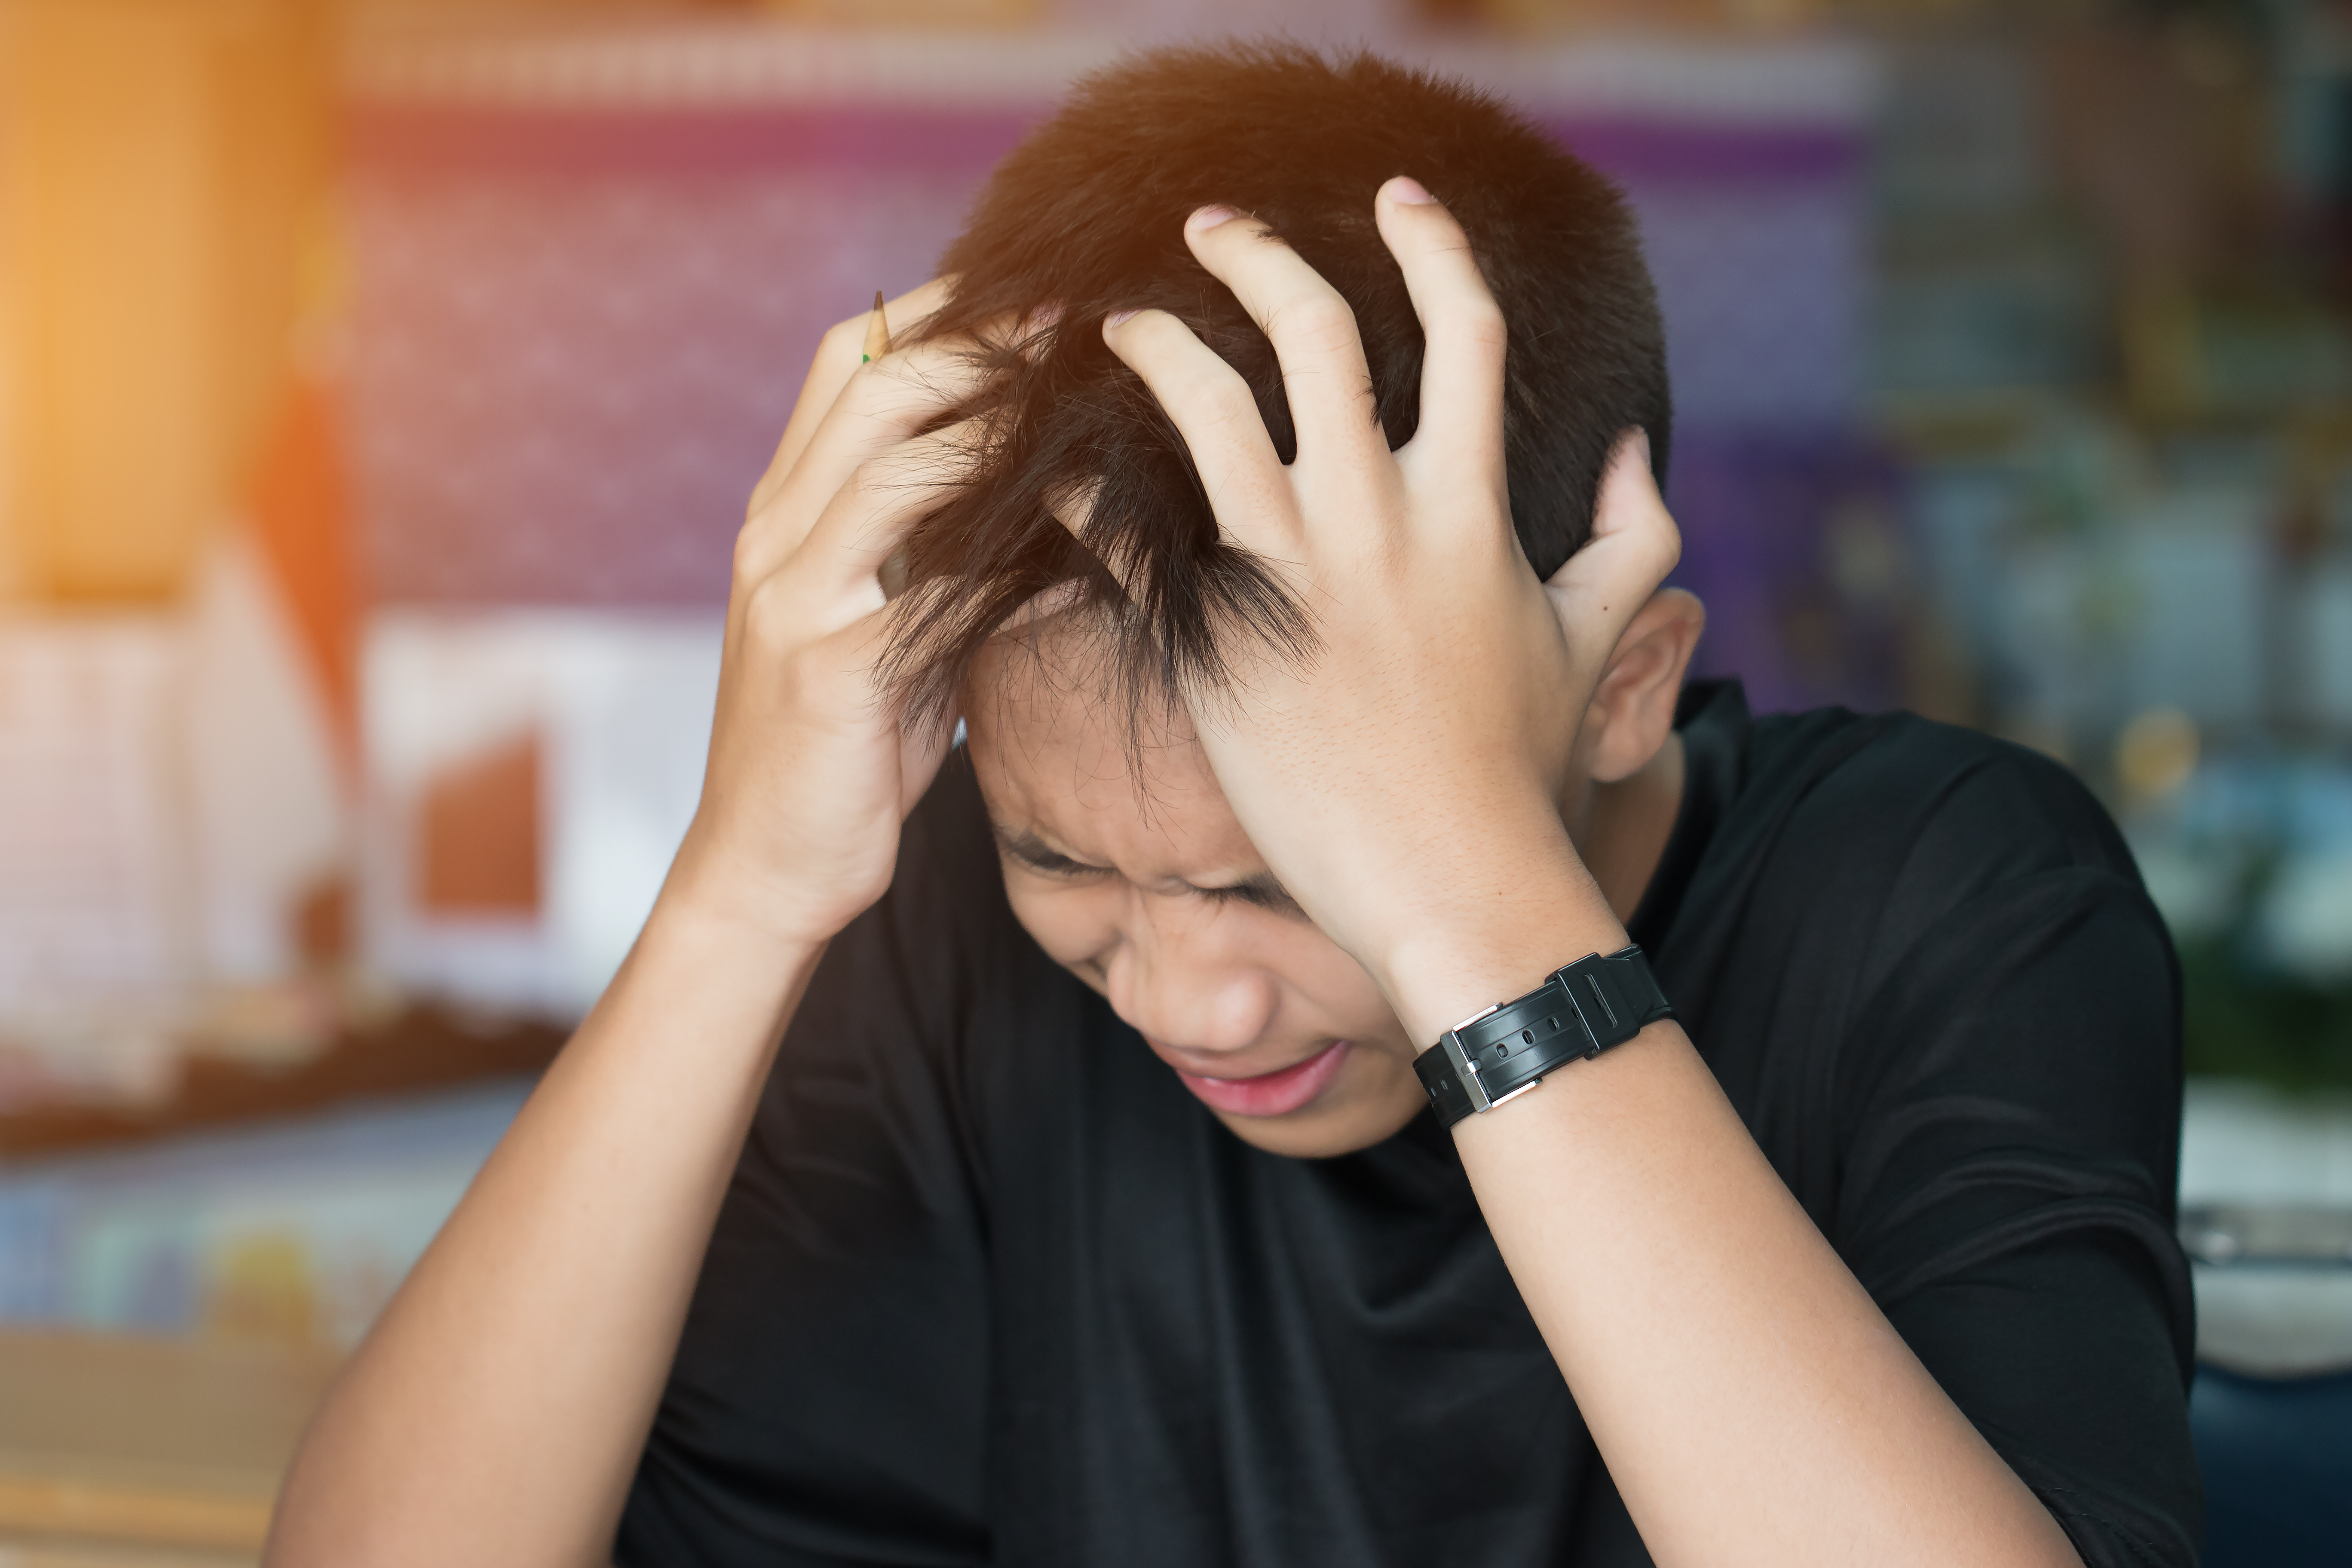 A stressed young boy | Source: Shutterstock